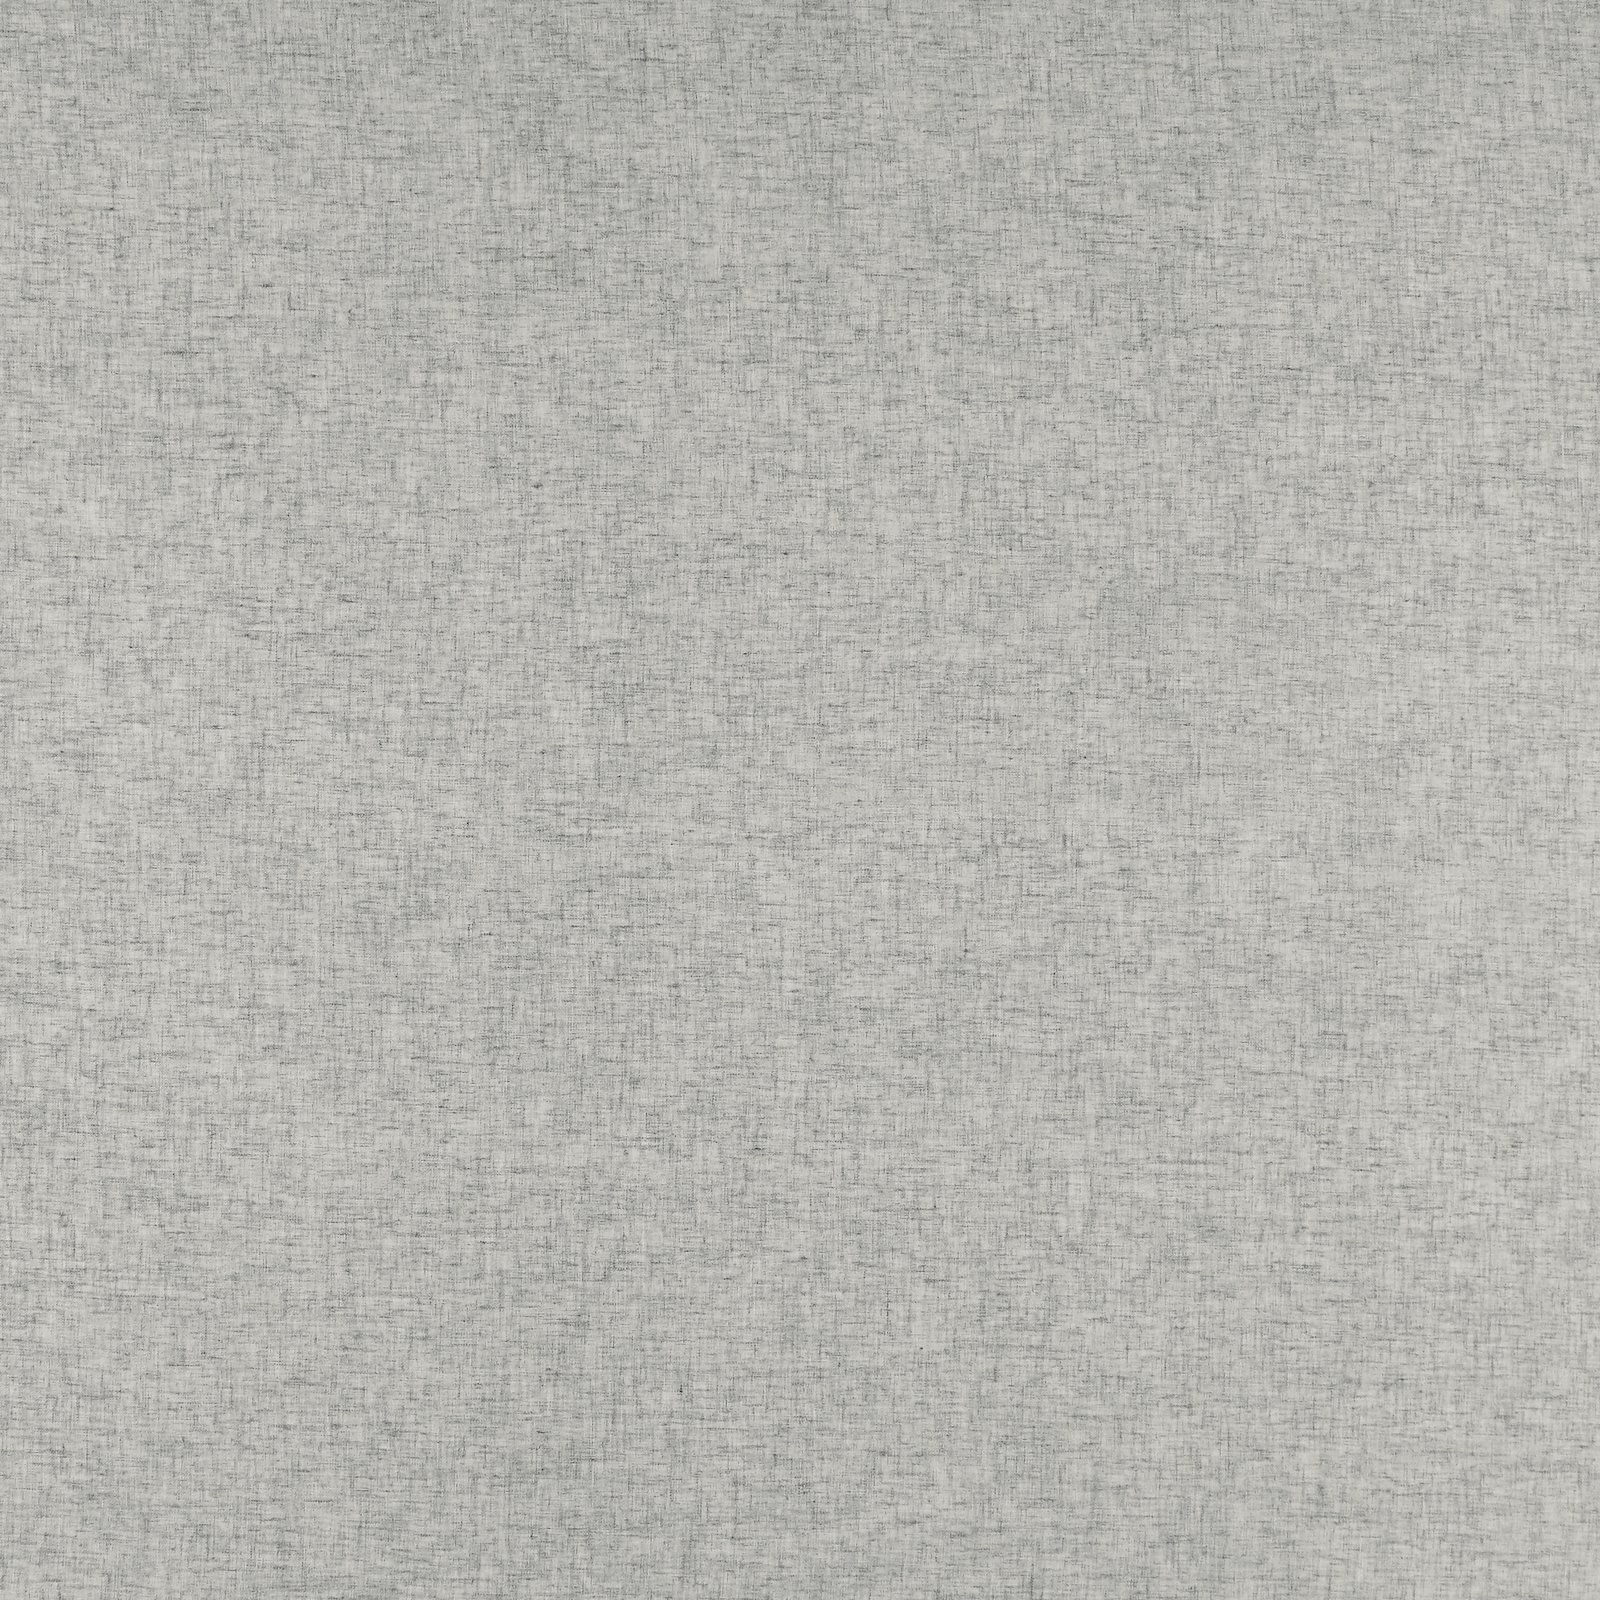 Voile grau Polyester/Leinen-Mix 835167_pack_solid